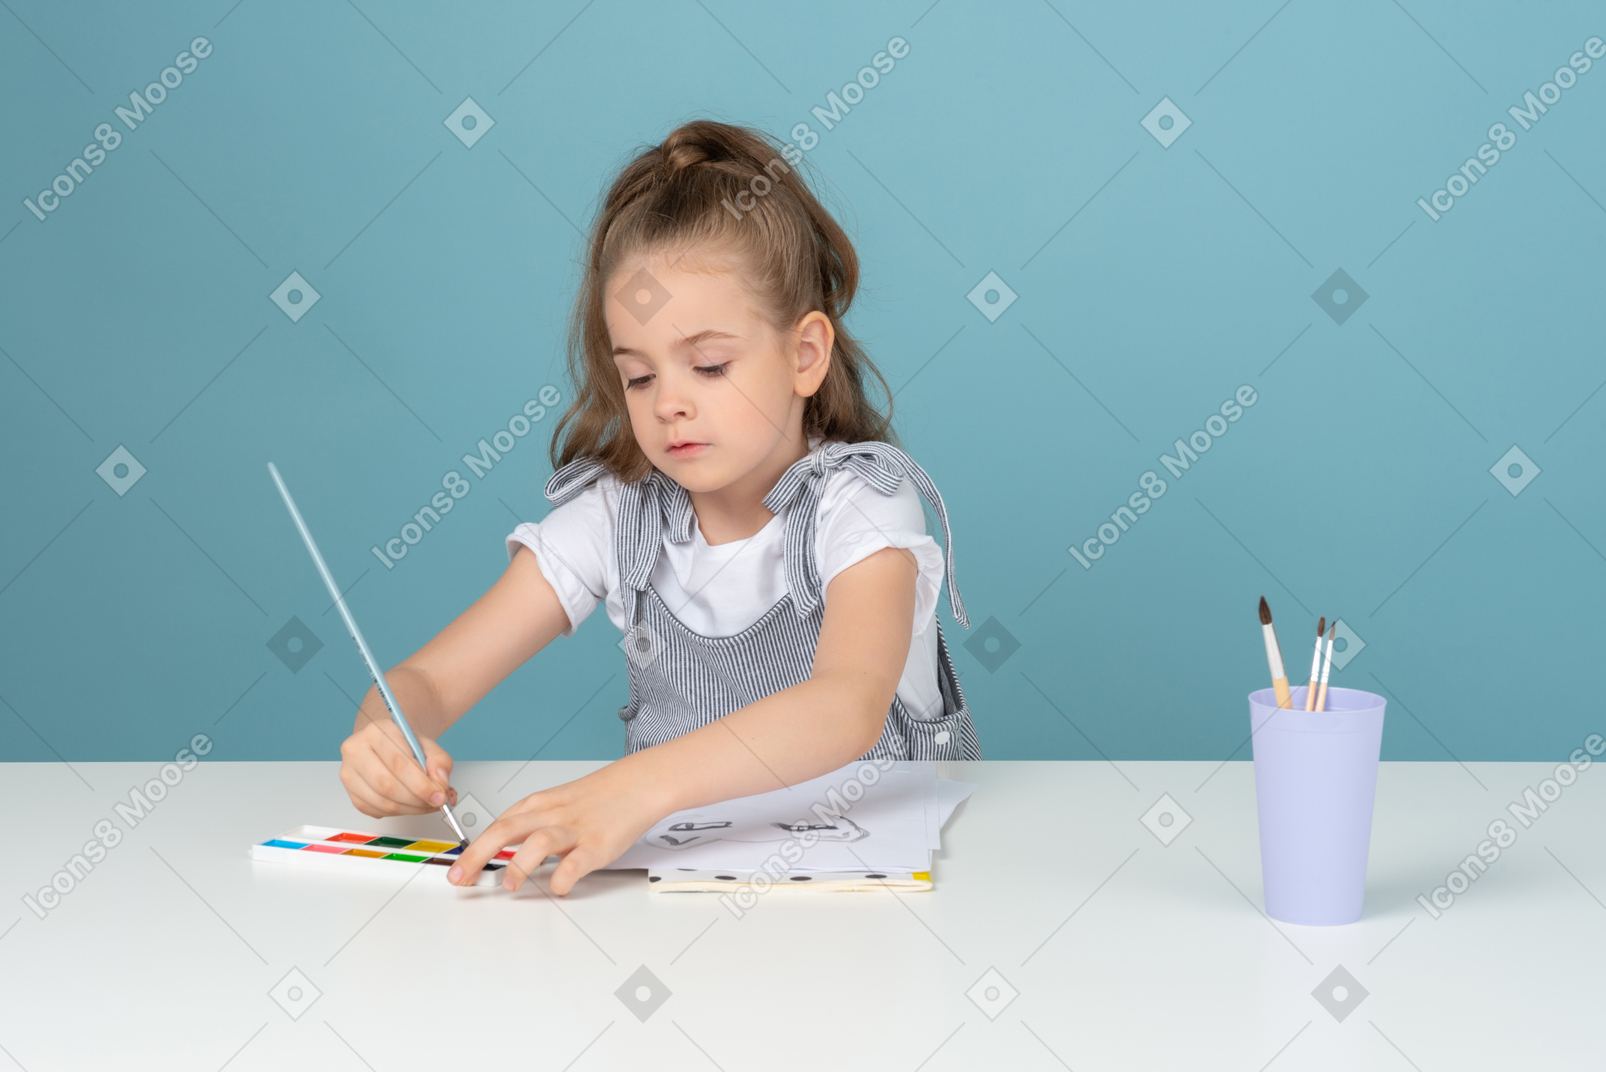 An artist in the making